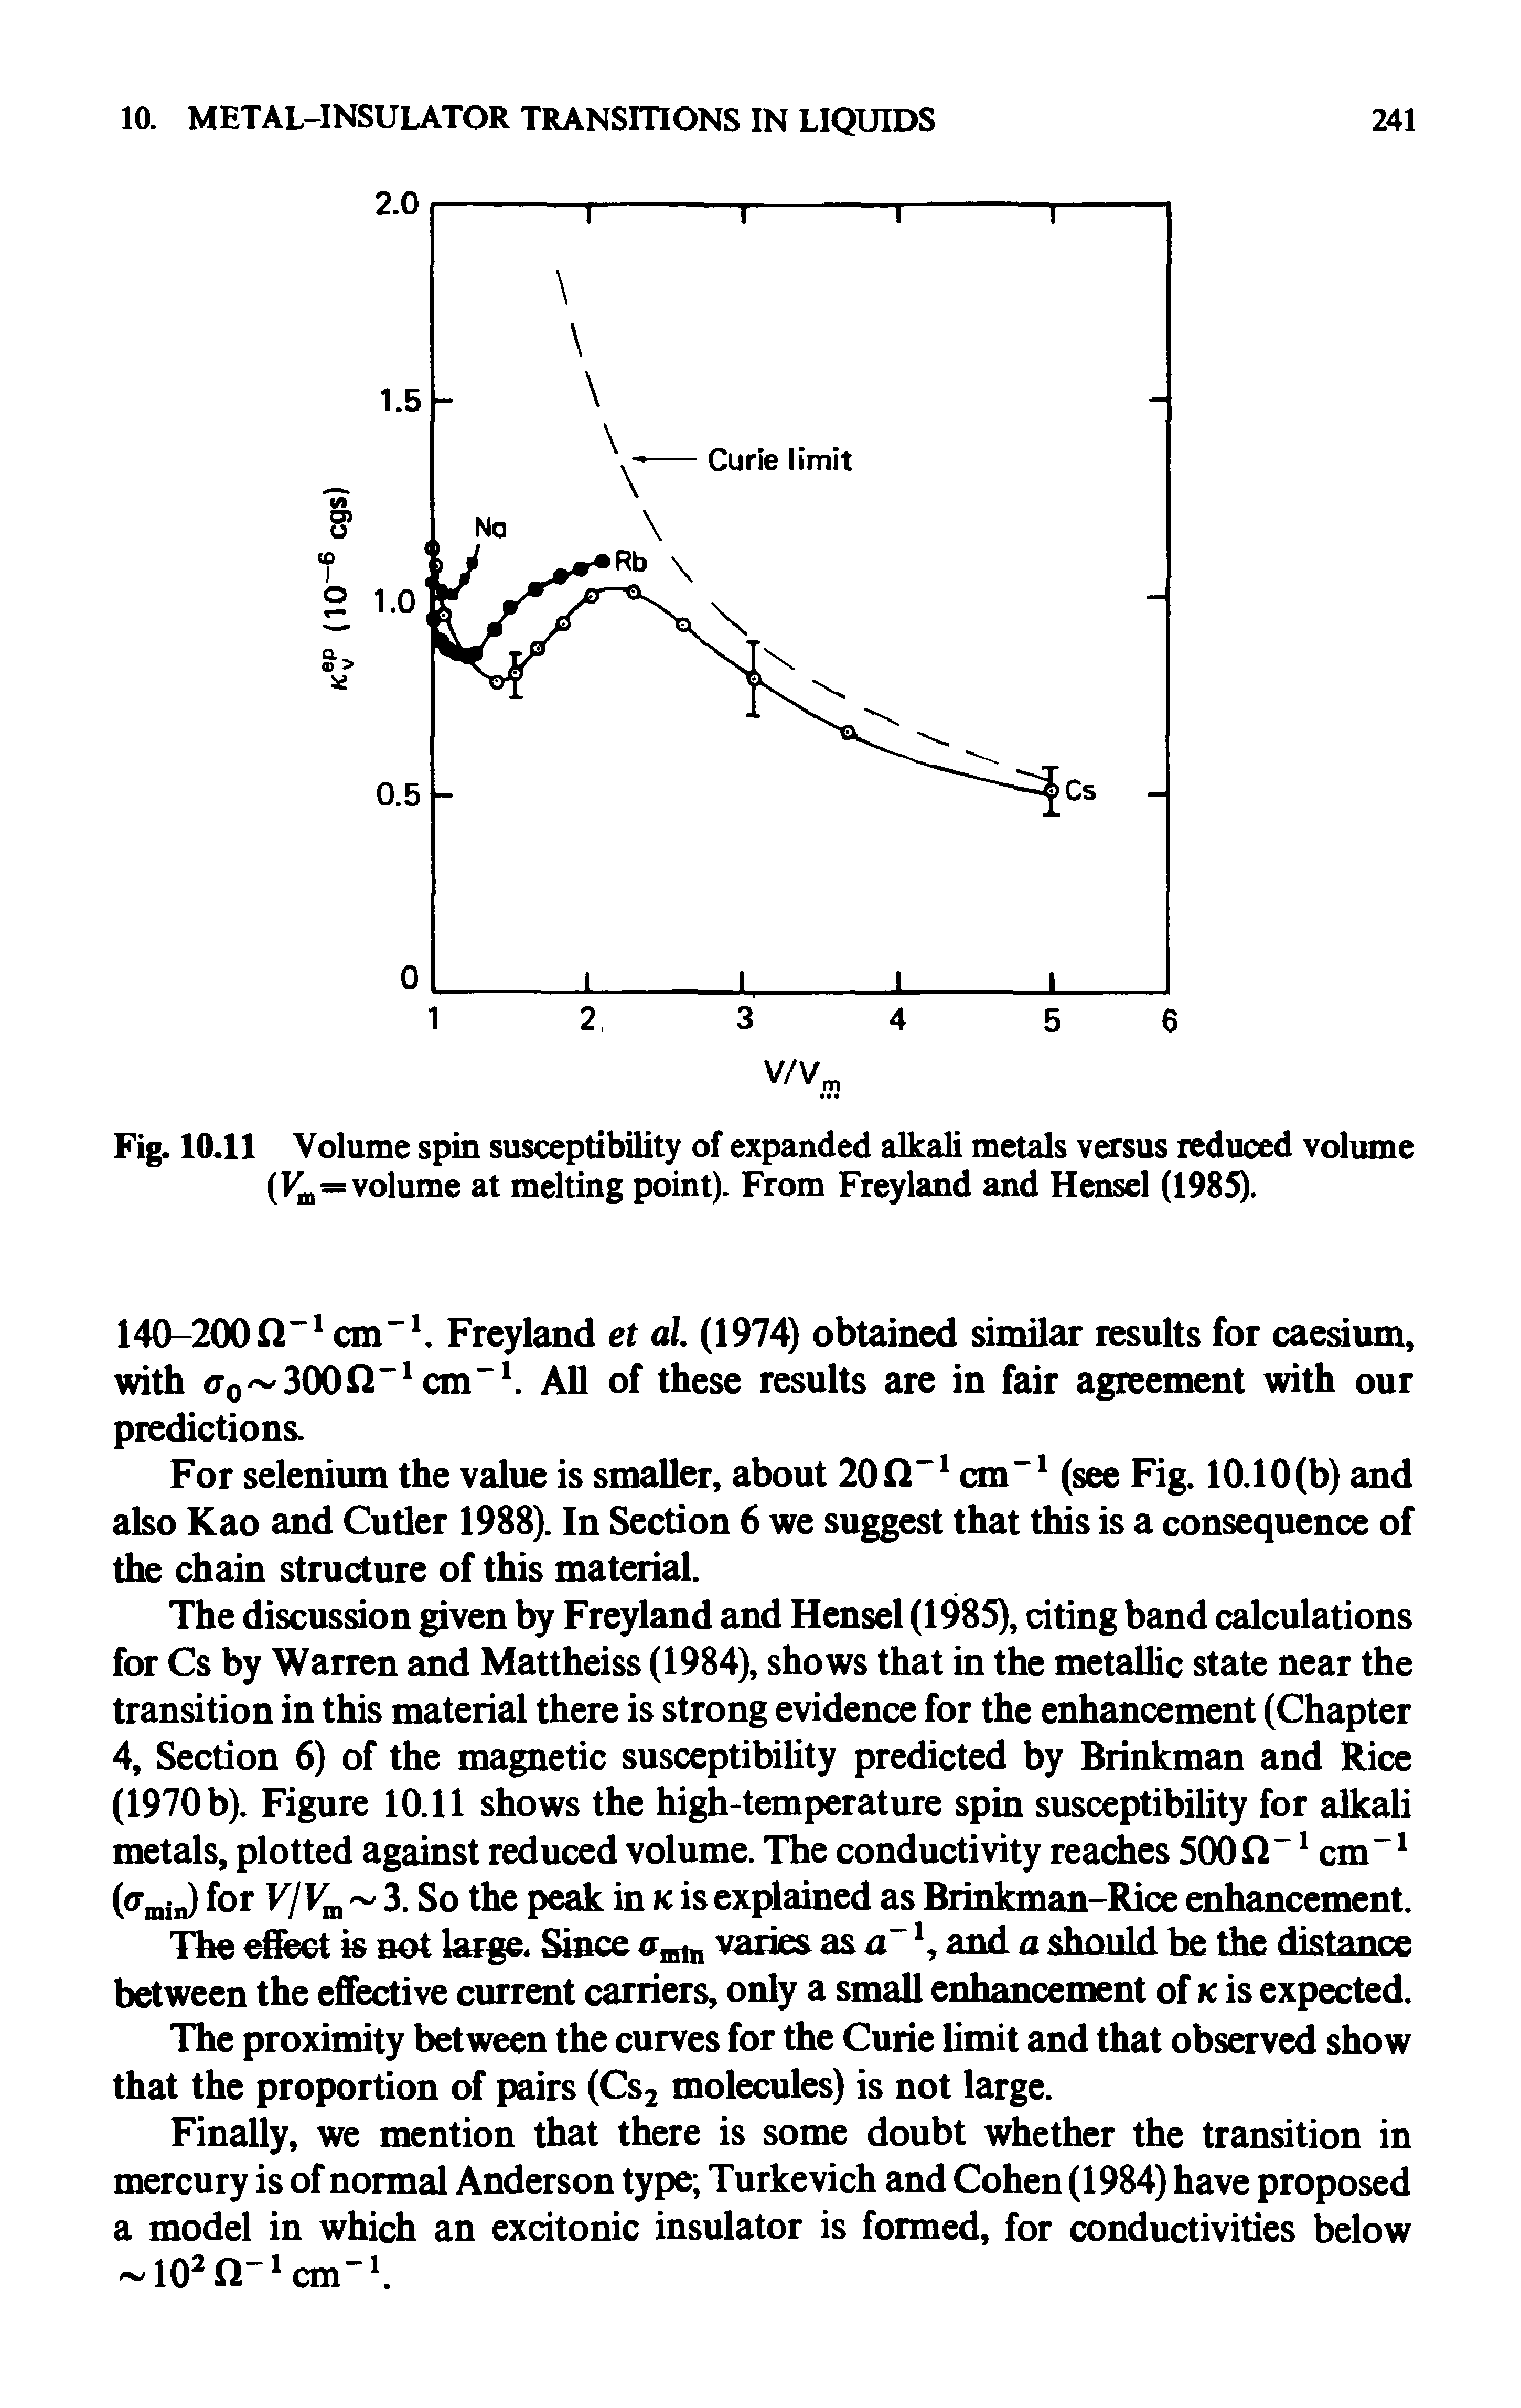 Fig. 10.11 Volume spin susceptibility of expanded alkali metals versus reduced volume (Fm—volume at melting point). From Freyland and Hensel (1985).